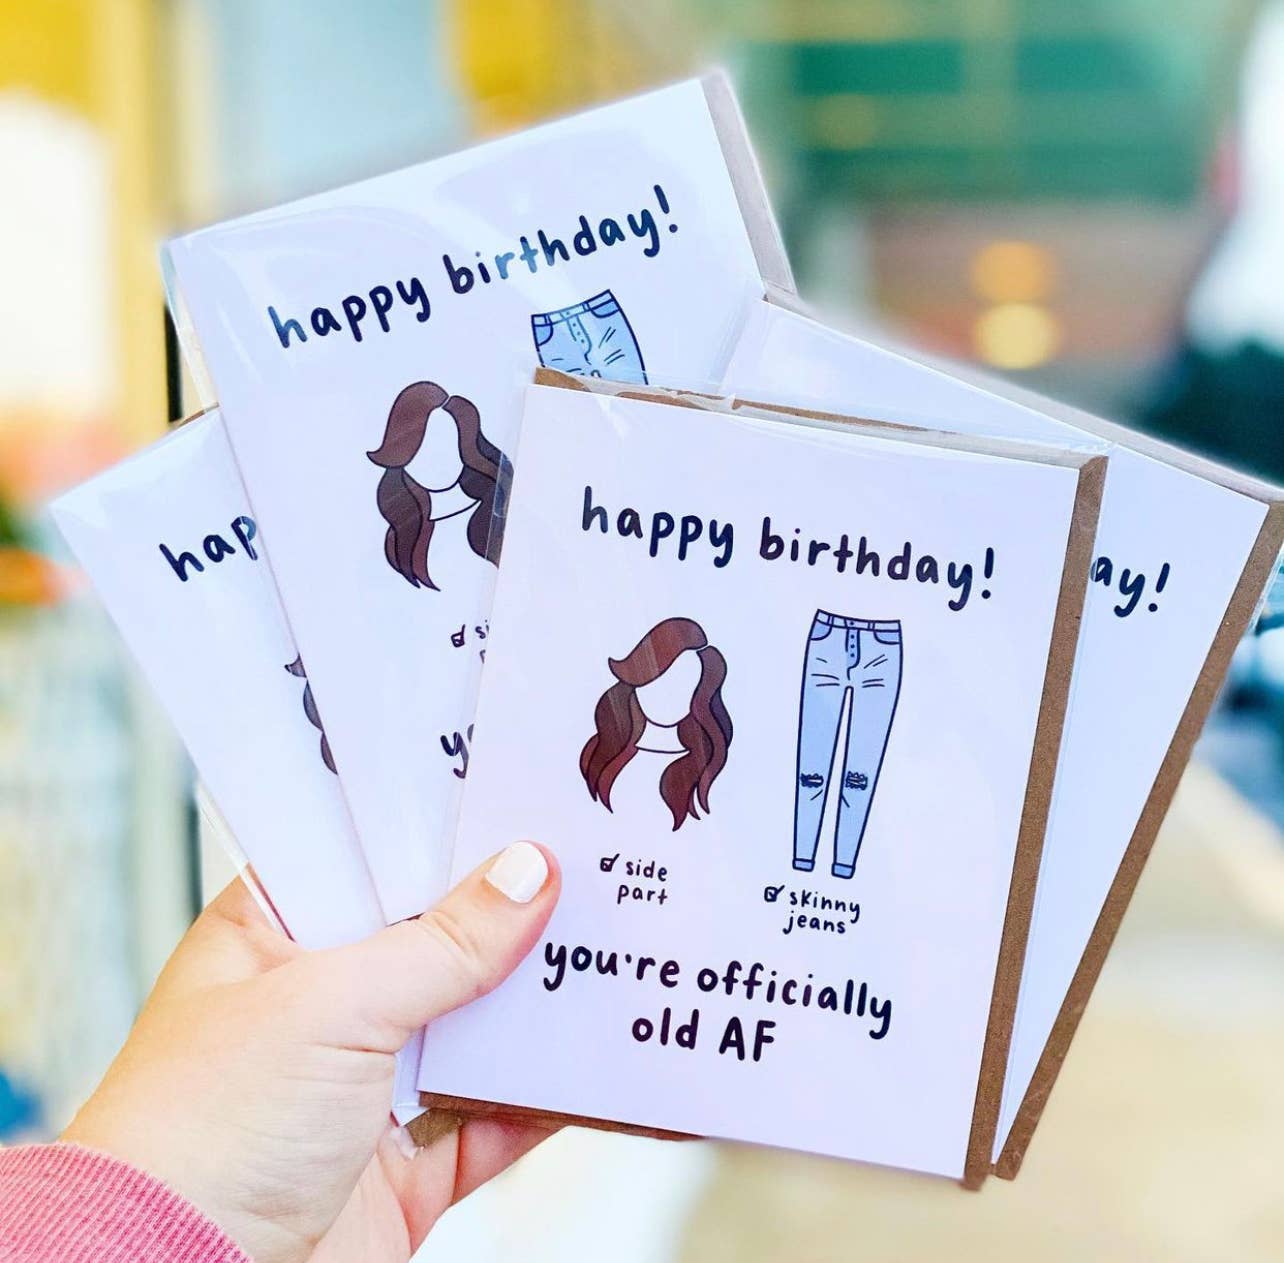 Brittany Paige - Side Parts & Skinny Jeans Birthday Card